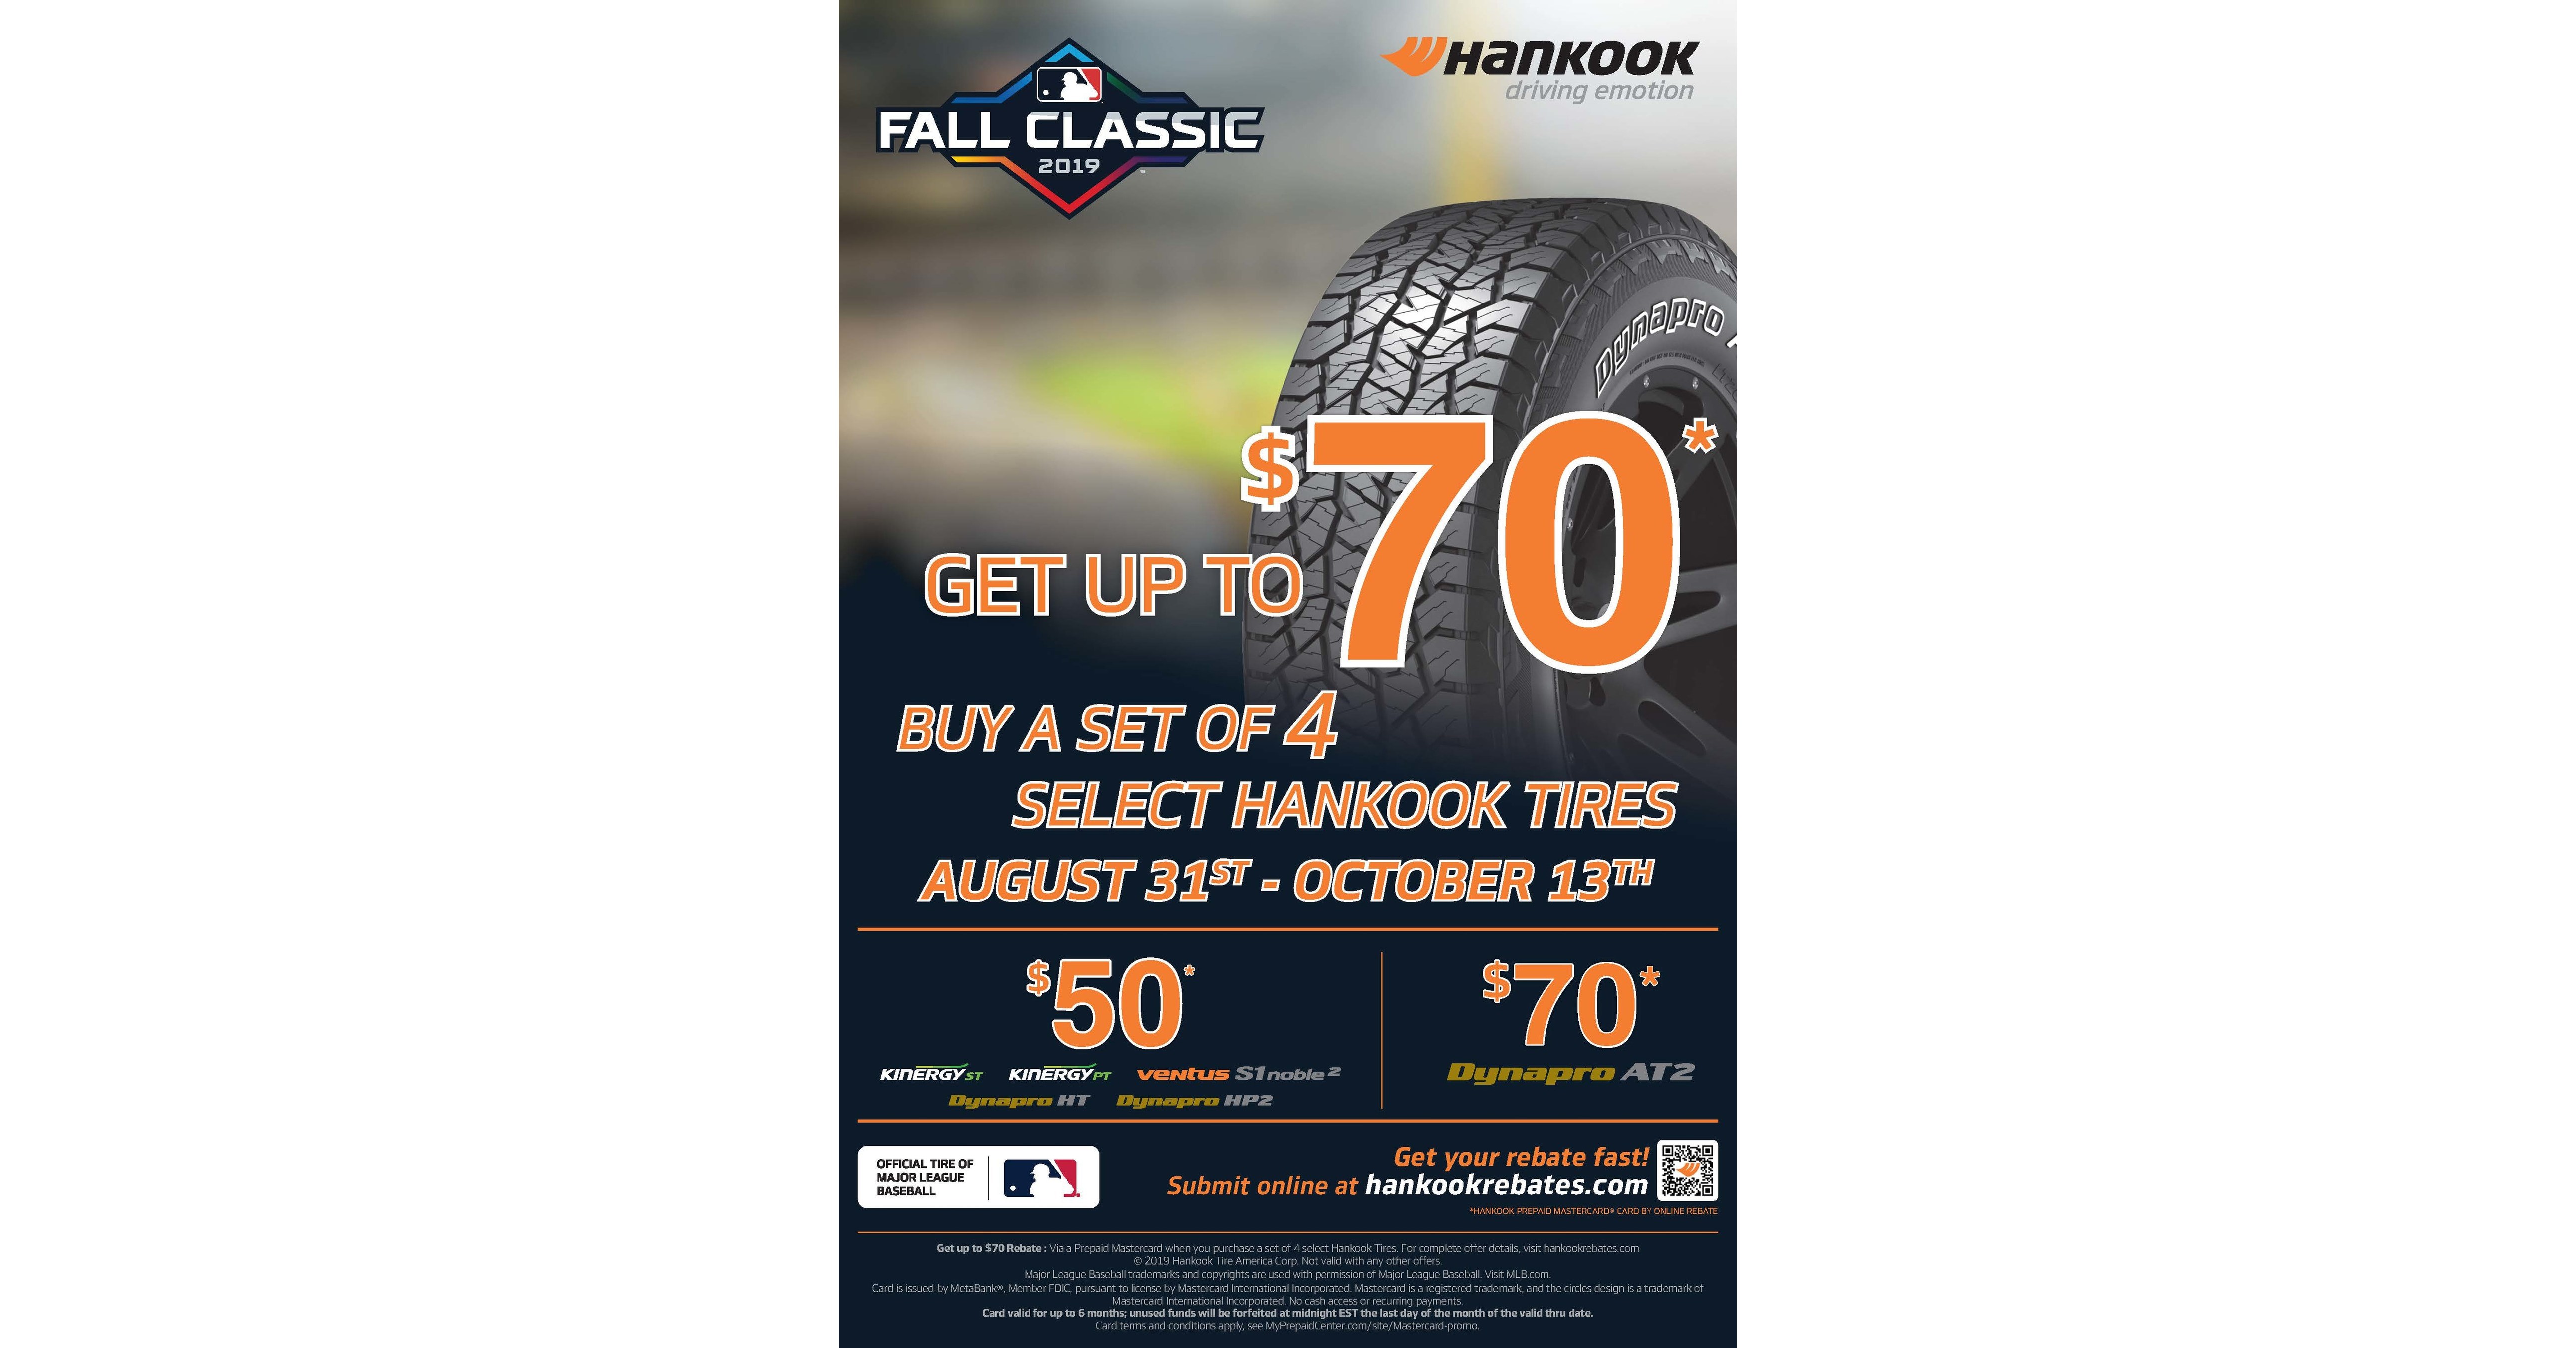 Is There A Rebate On Hankook Tires